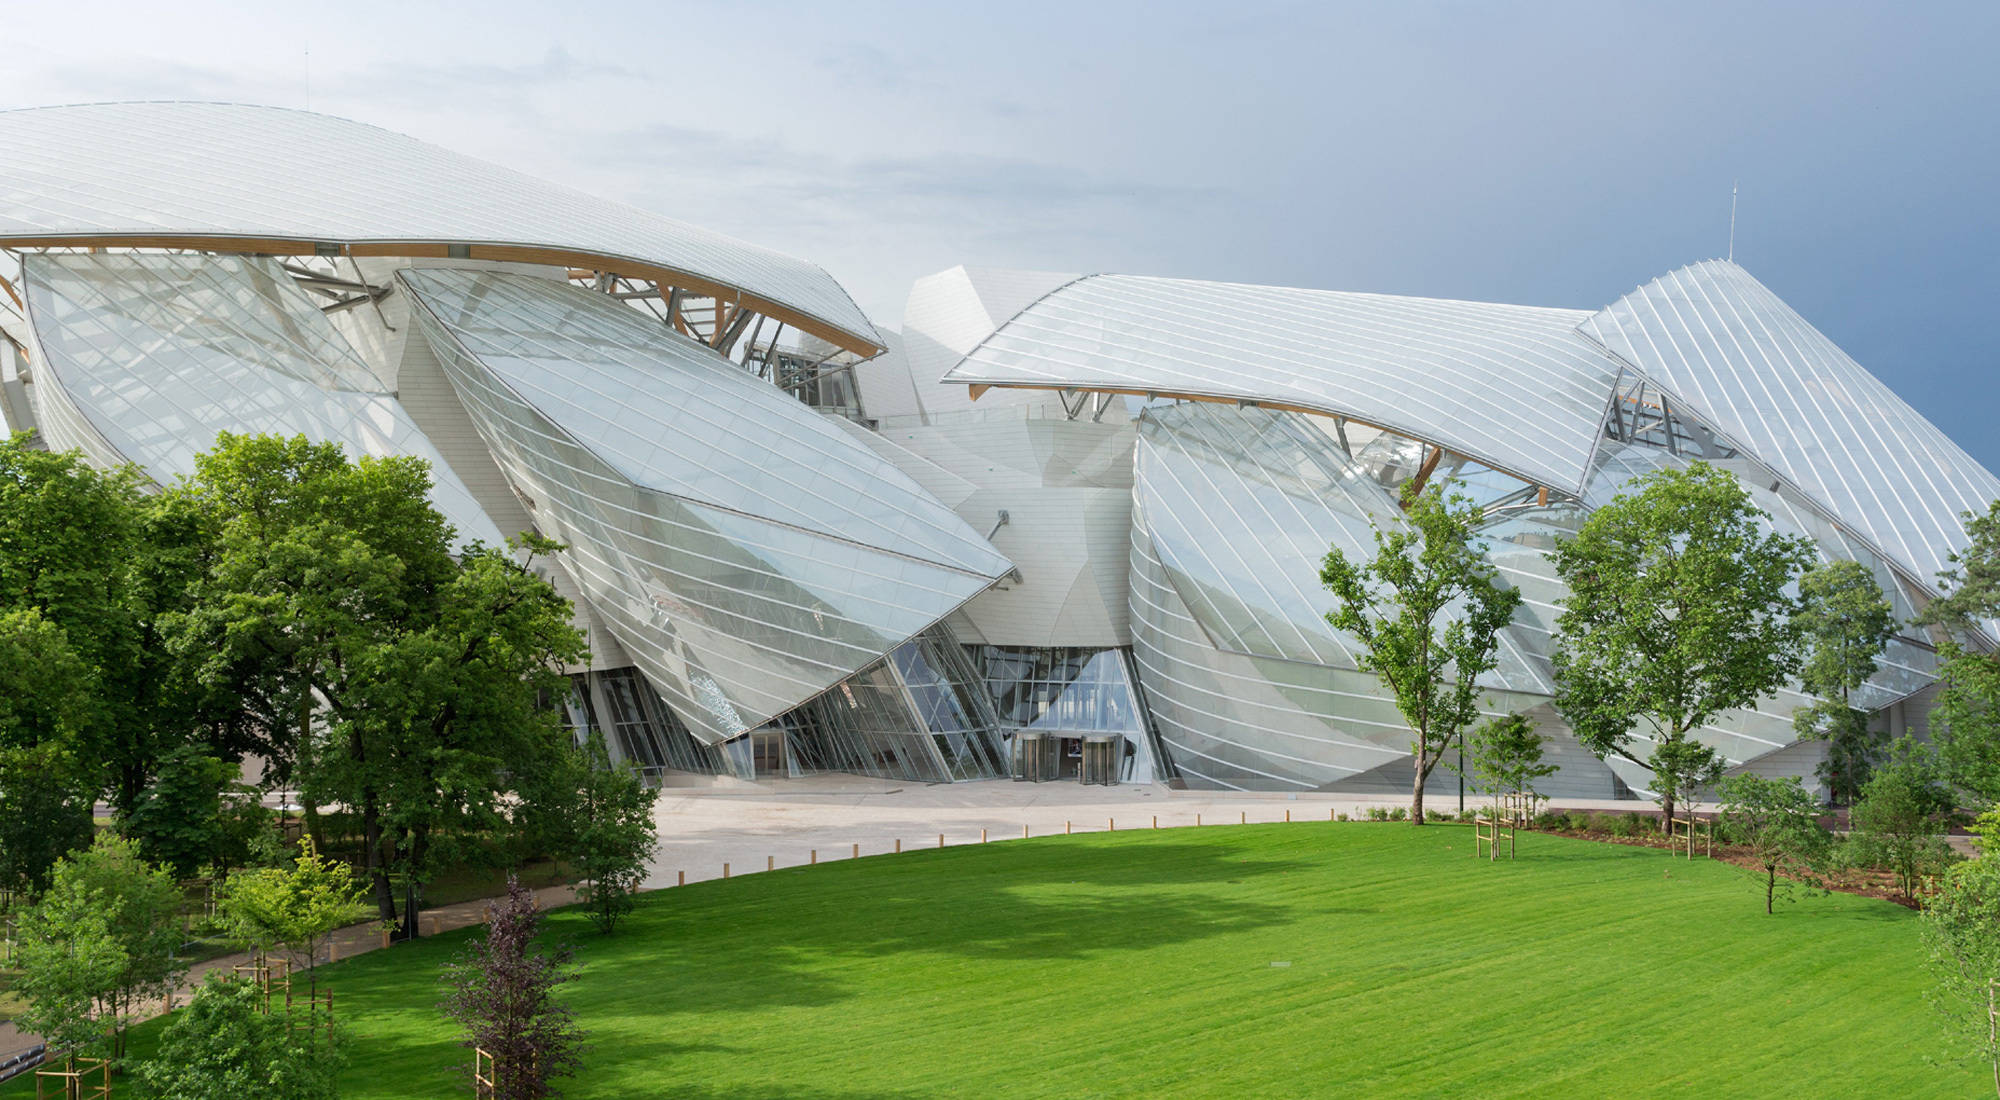 Spoiler Alert: Fondation Louis Vuitton is Awesome, though